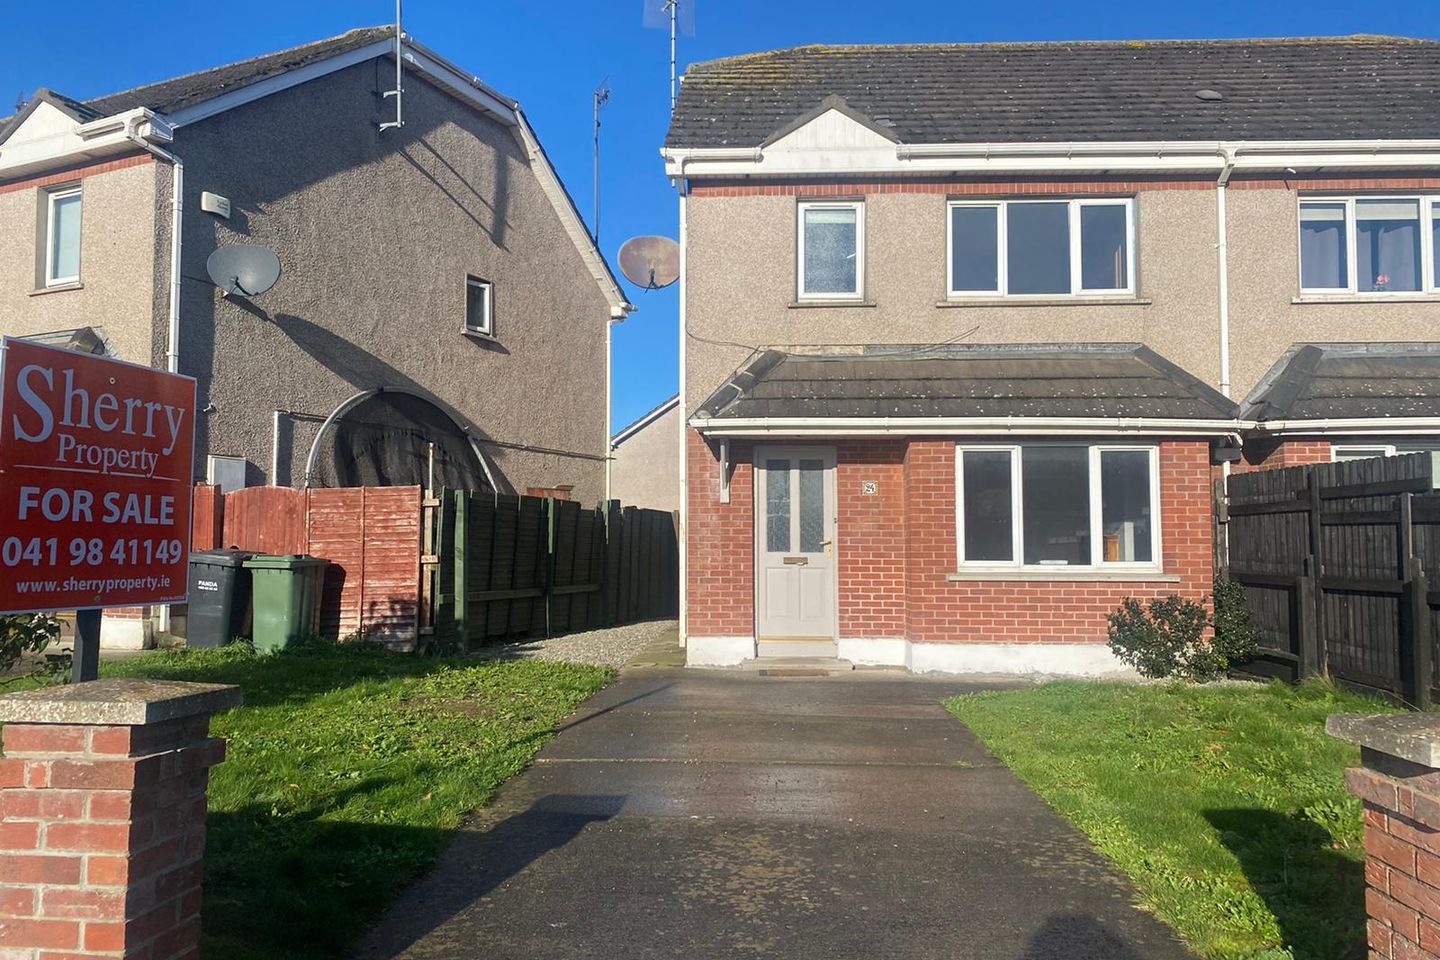 24 Cherrywood Drive, Termon Abbey, Drogheda, Co. Louth